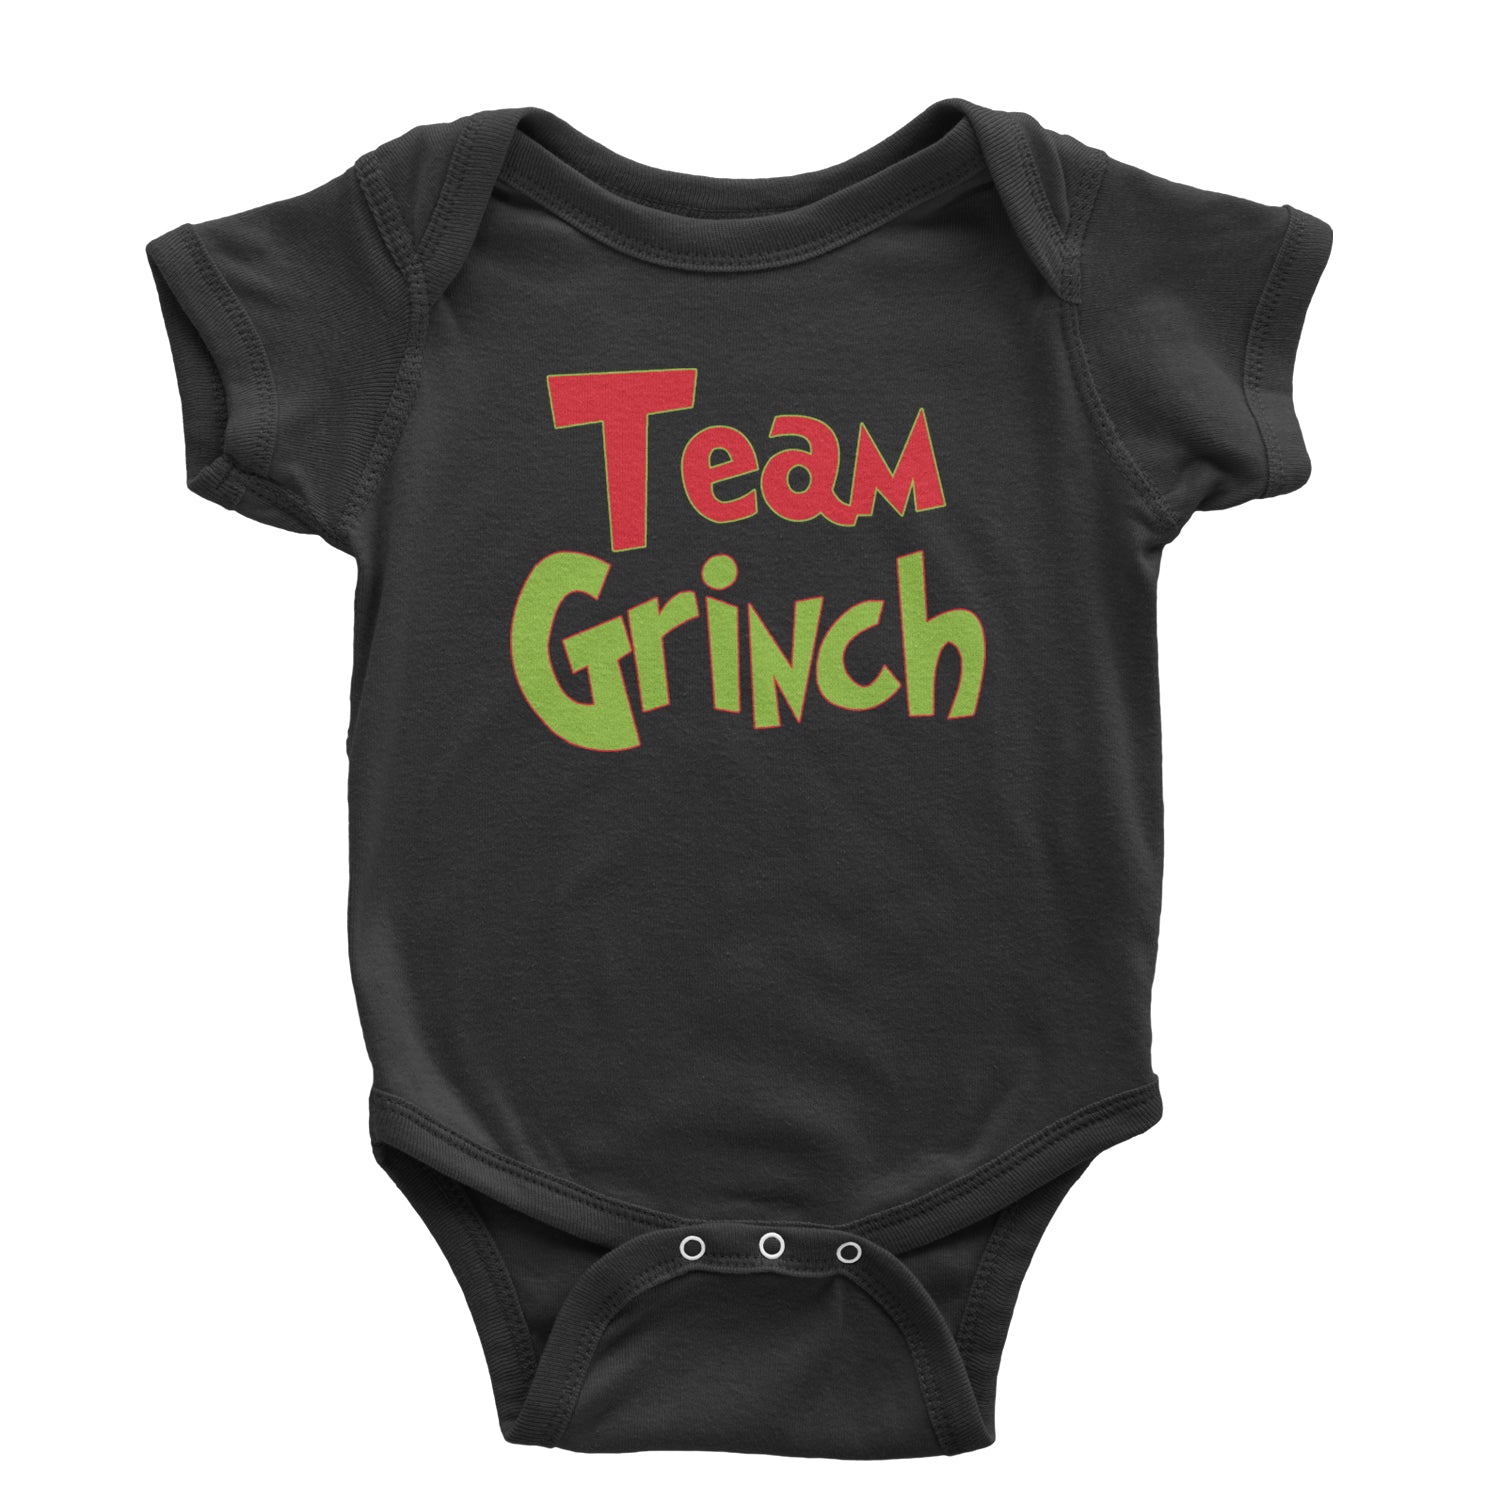 Team Gr-nch Jolly Grinchmas Merry Christmas Infant One-Piece Romper Bodysuit and Toddler T-shirt